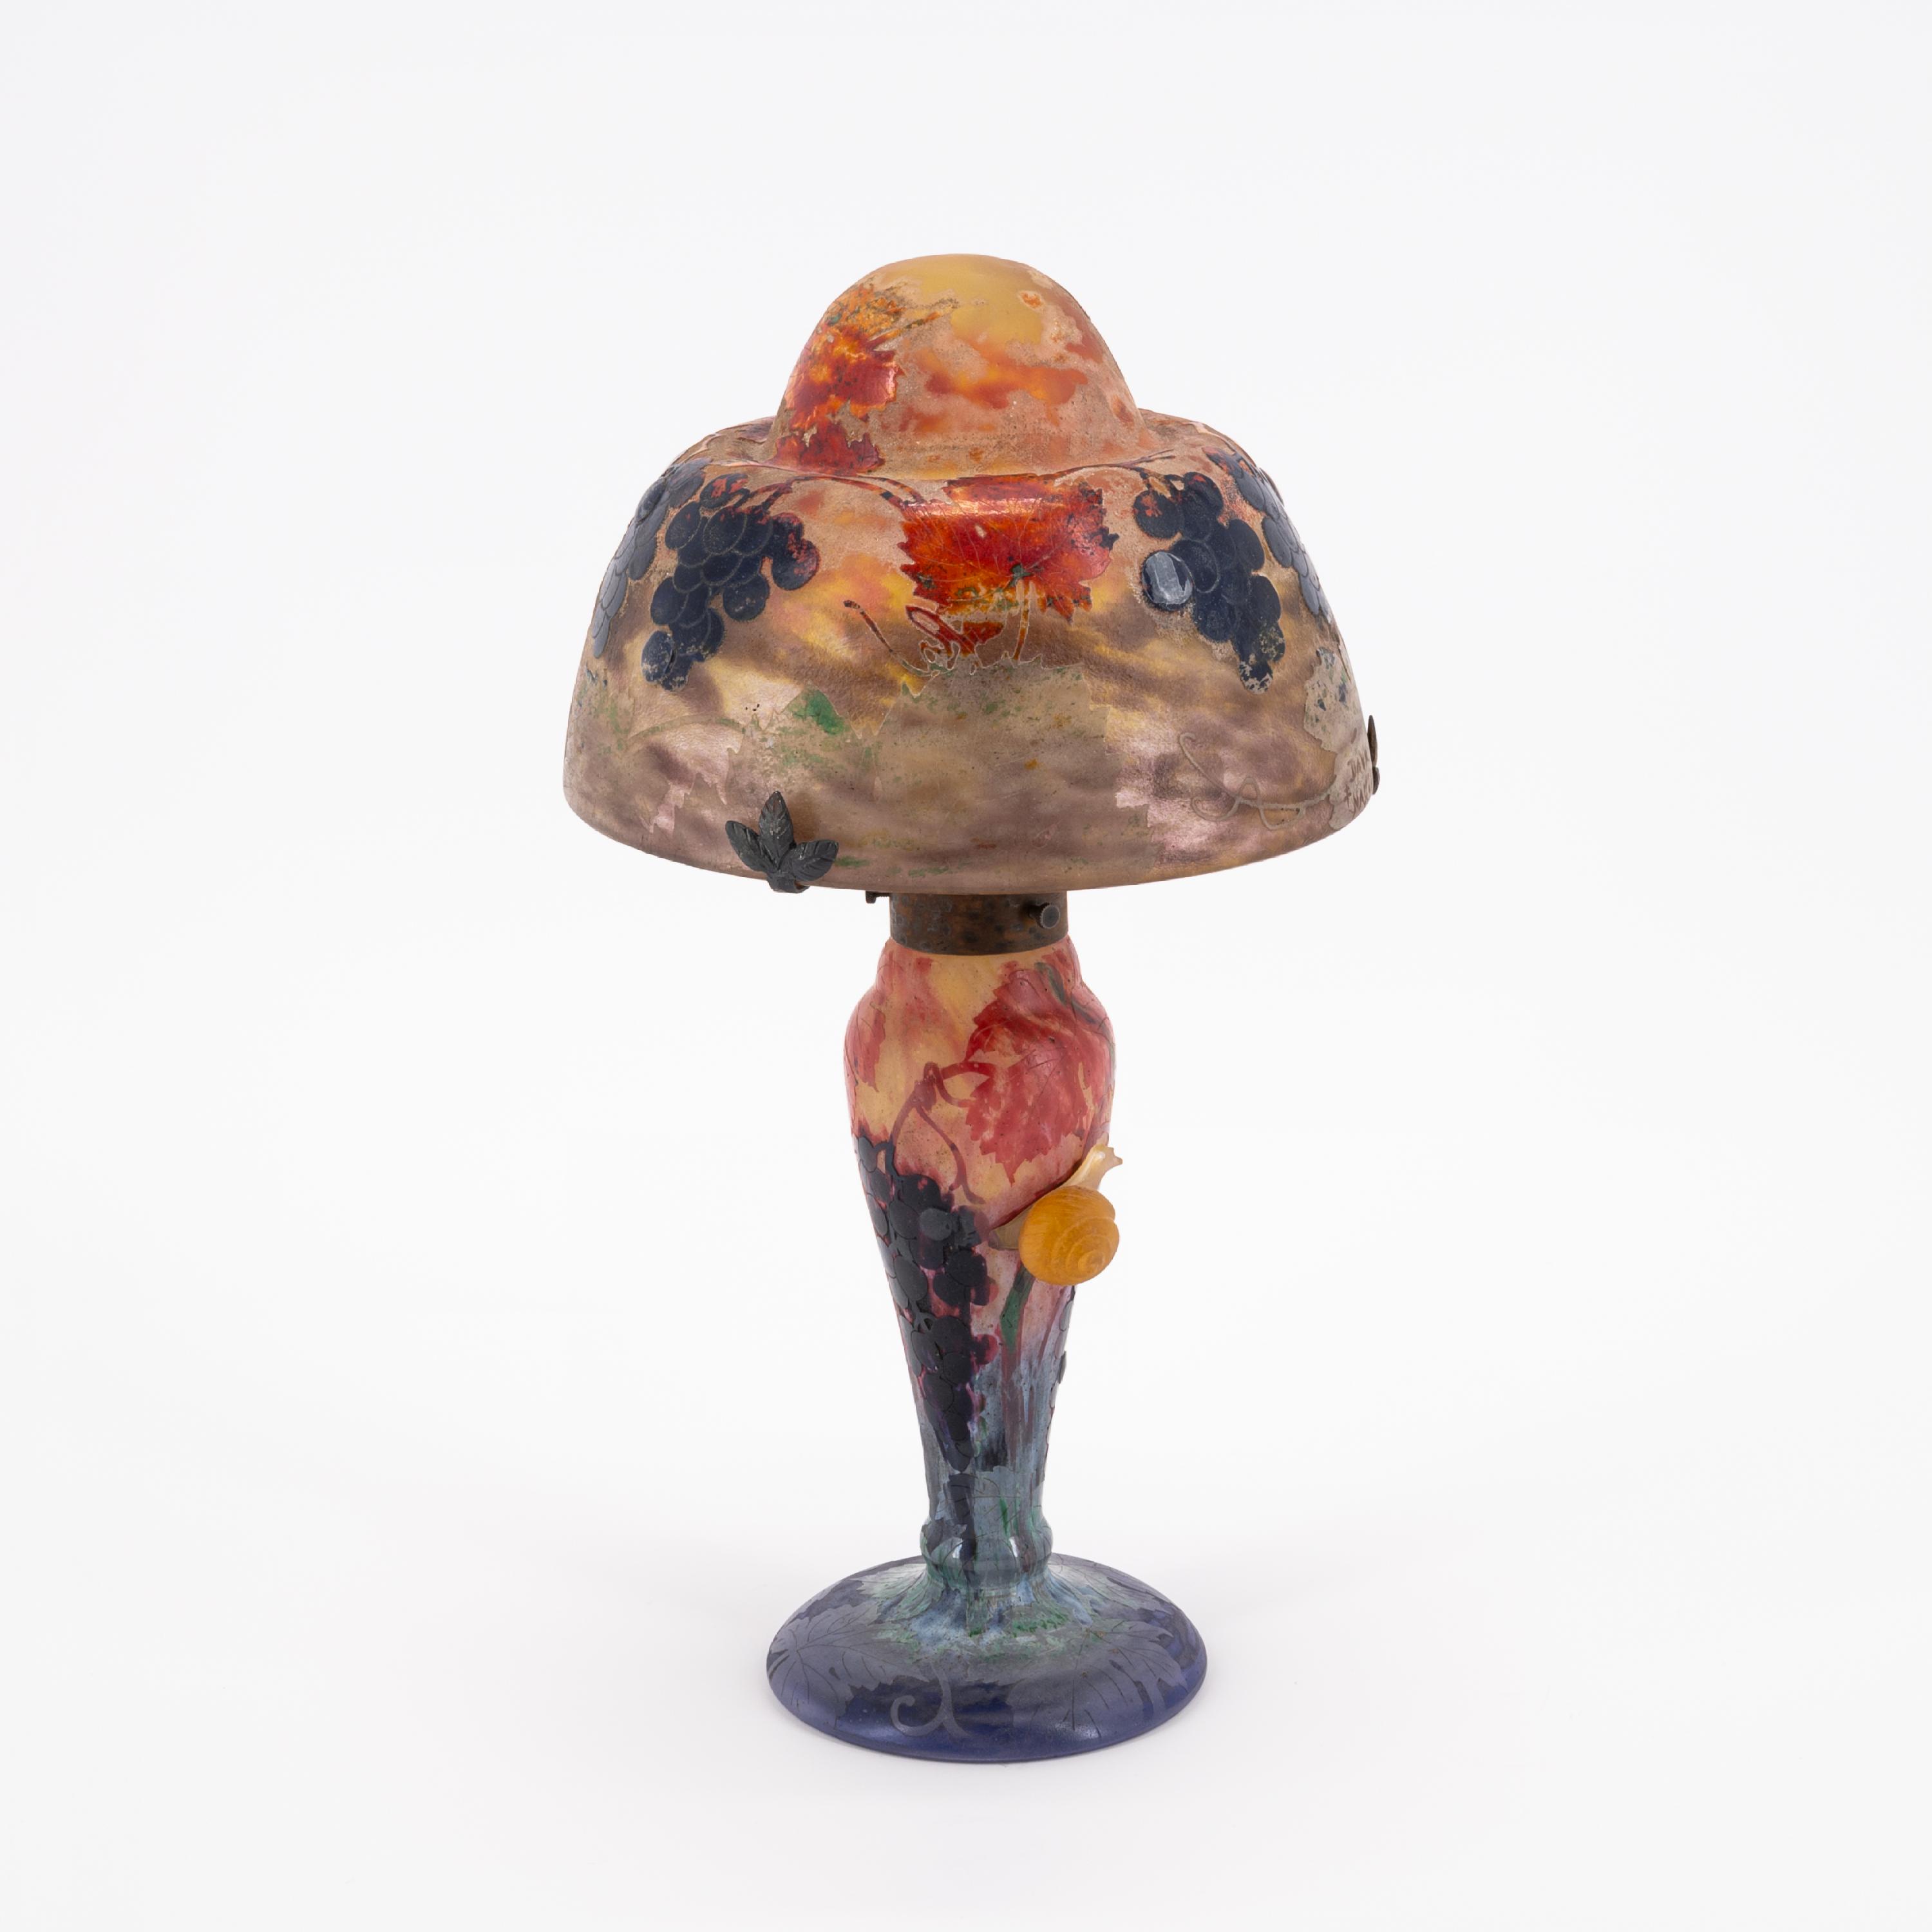 RARE GLASS TABLE LAMP 'VIGNE ET ESCARGOTS' WITH A SNAIL - Image 5 of 10